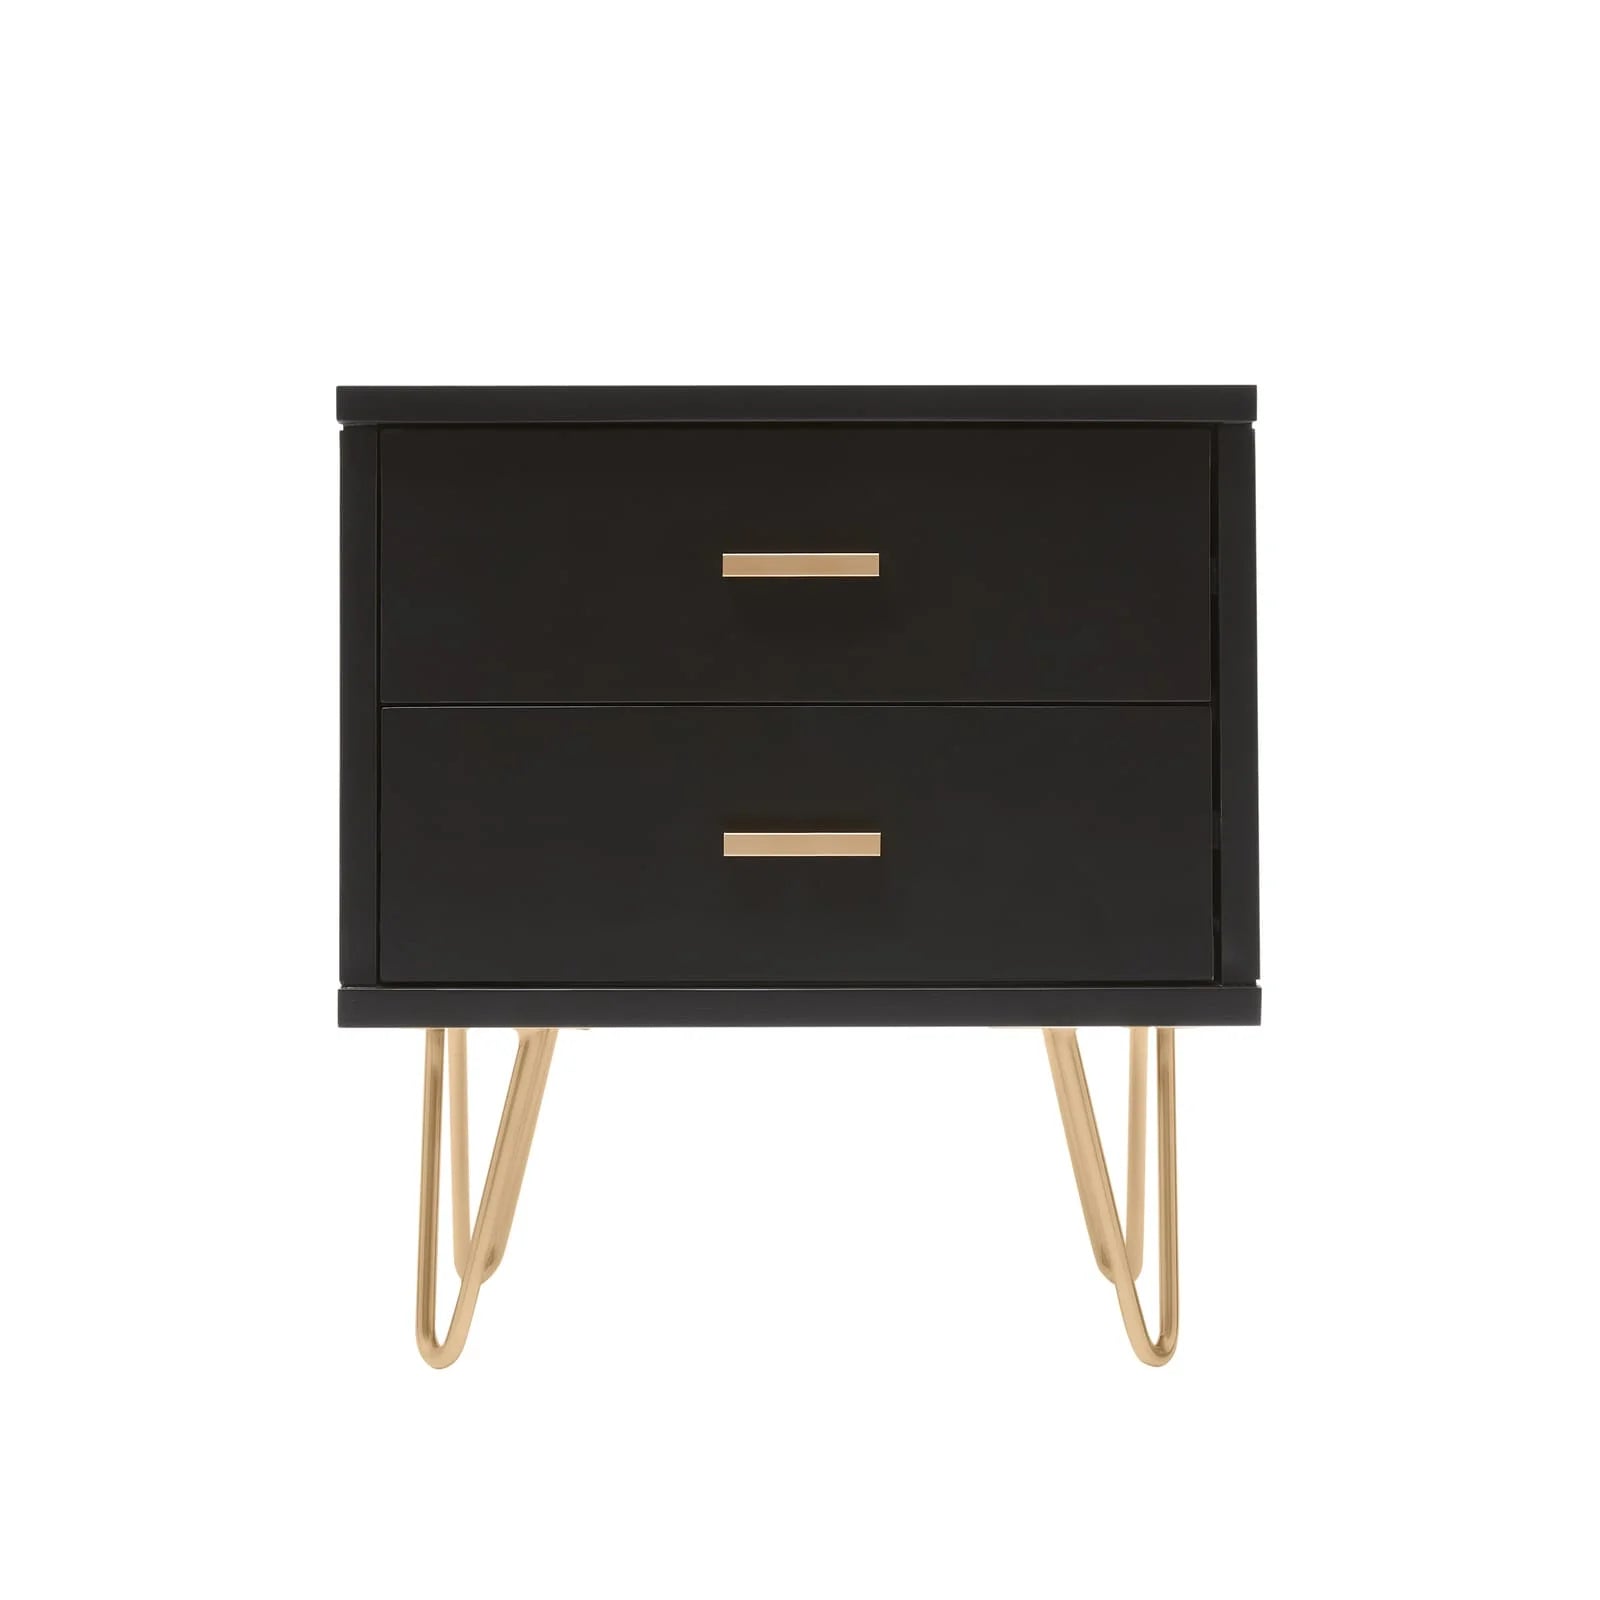 Monroe black painted solid wood bedside table with 2 drawers and metal hardware | malletandplane.com